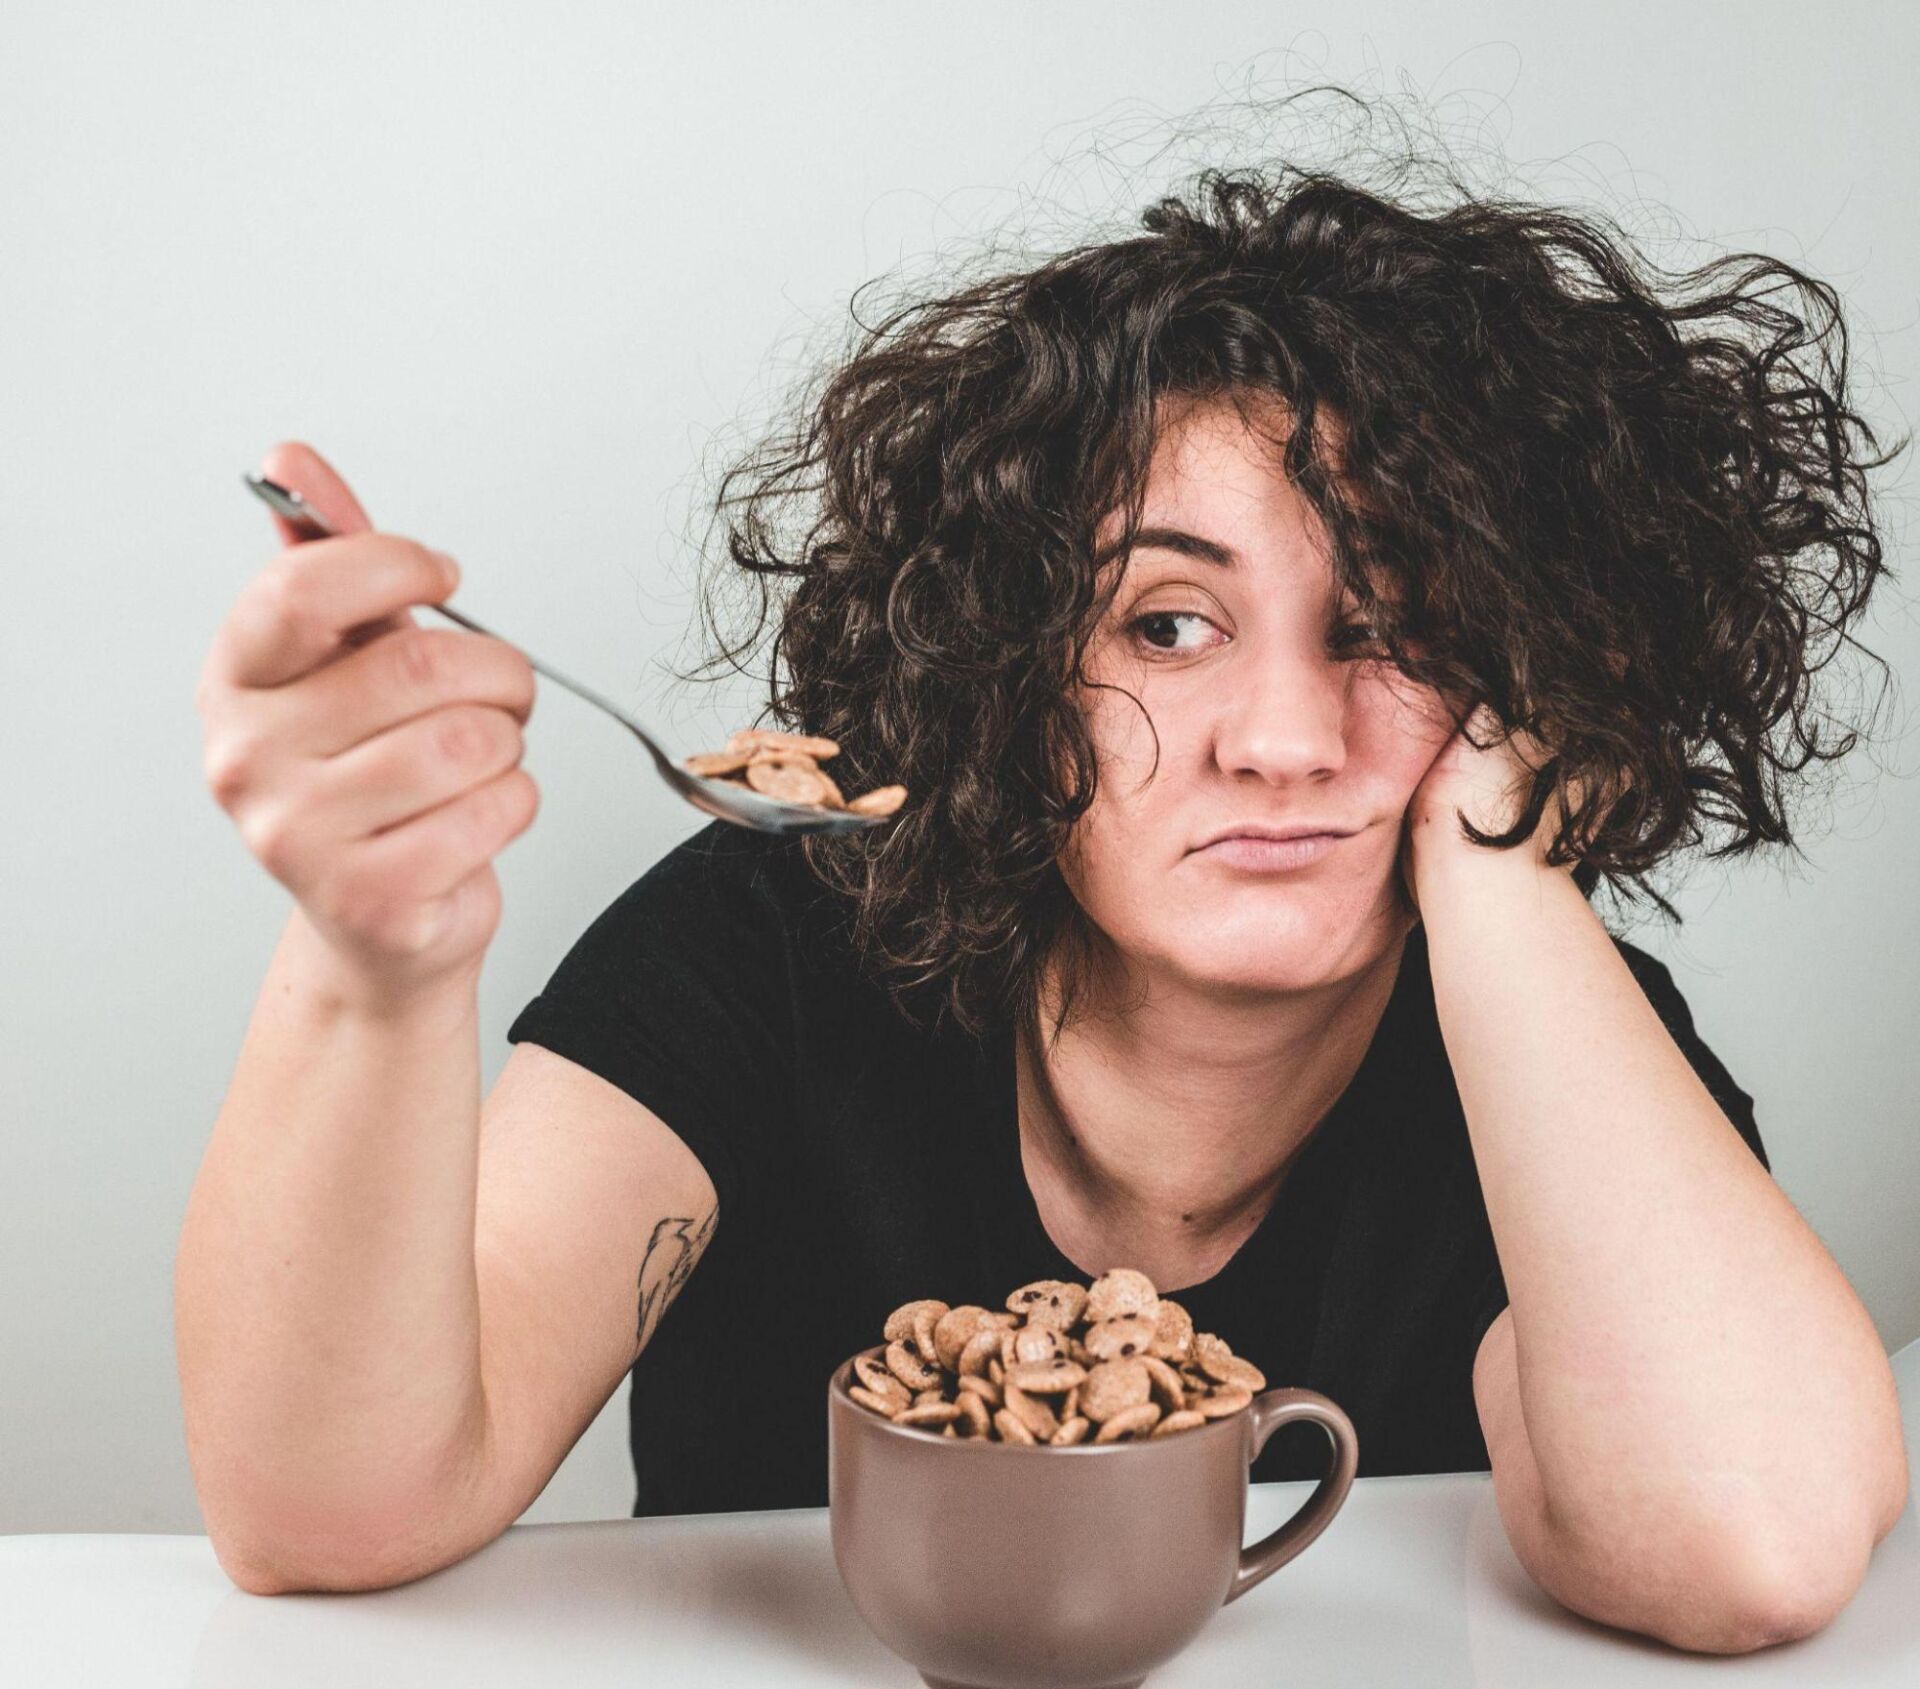 Person with weight and eating disorder deciding whether or not to eat cereal